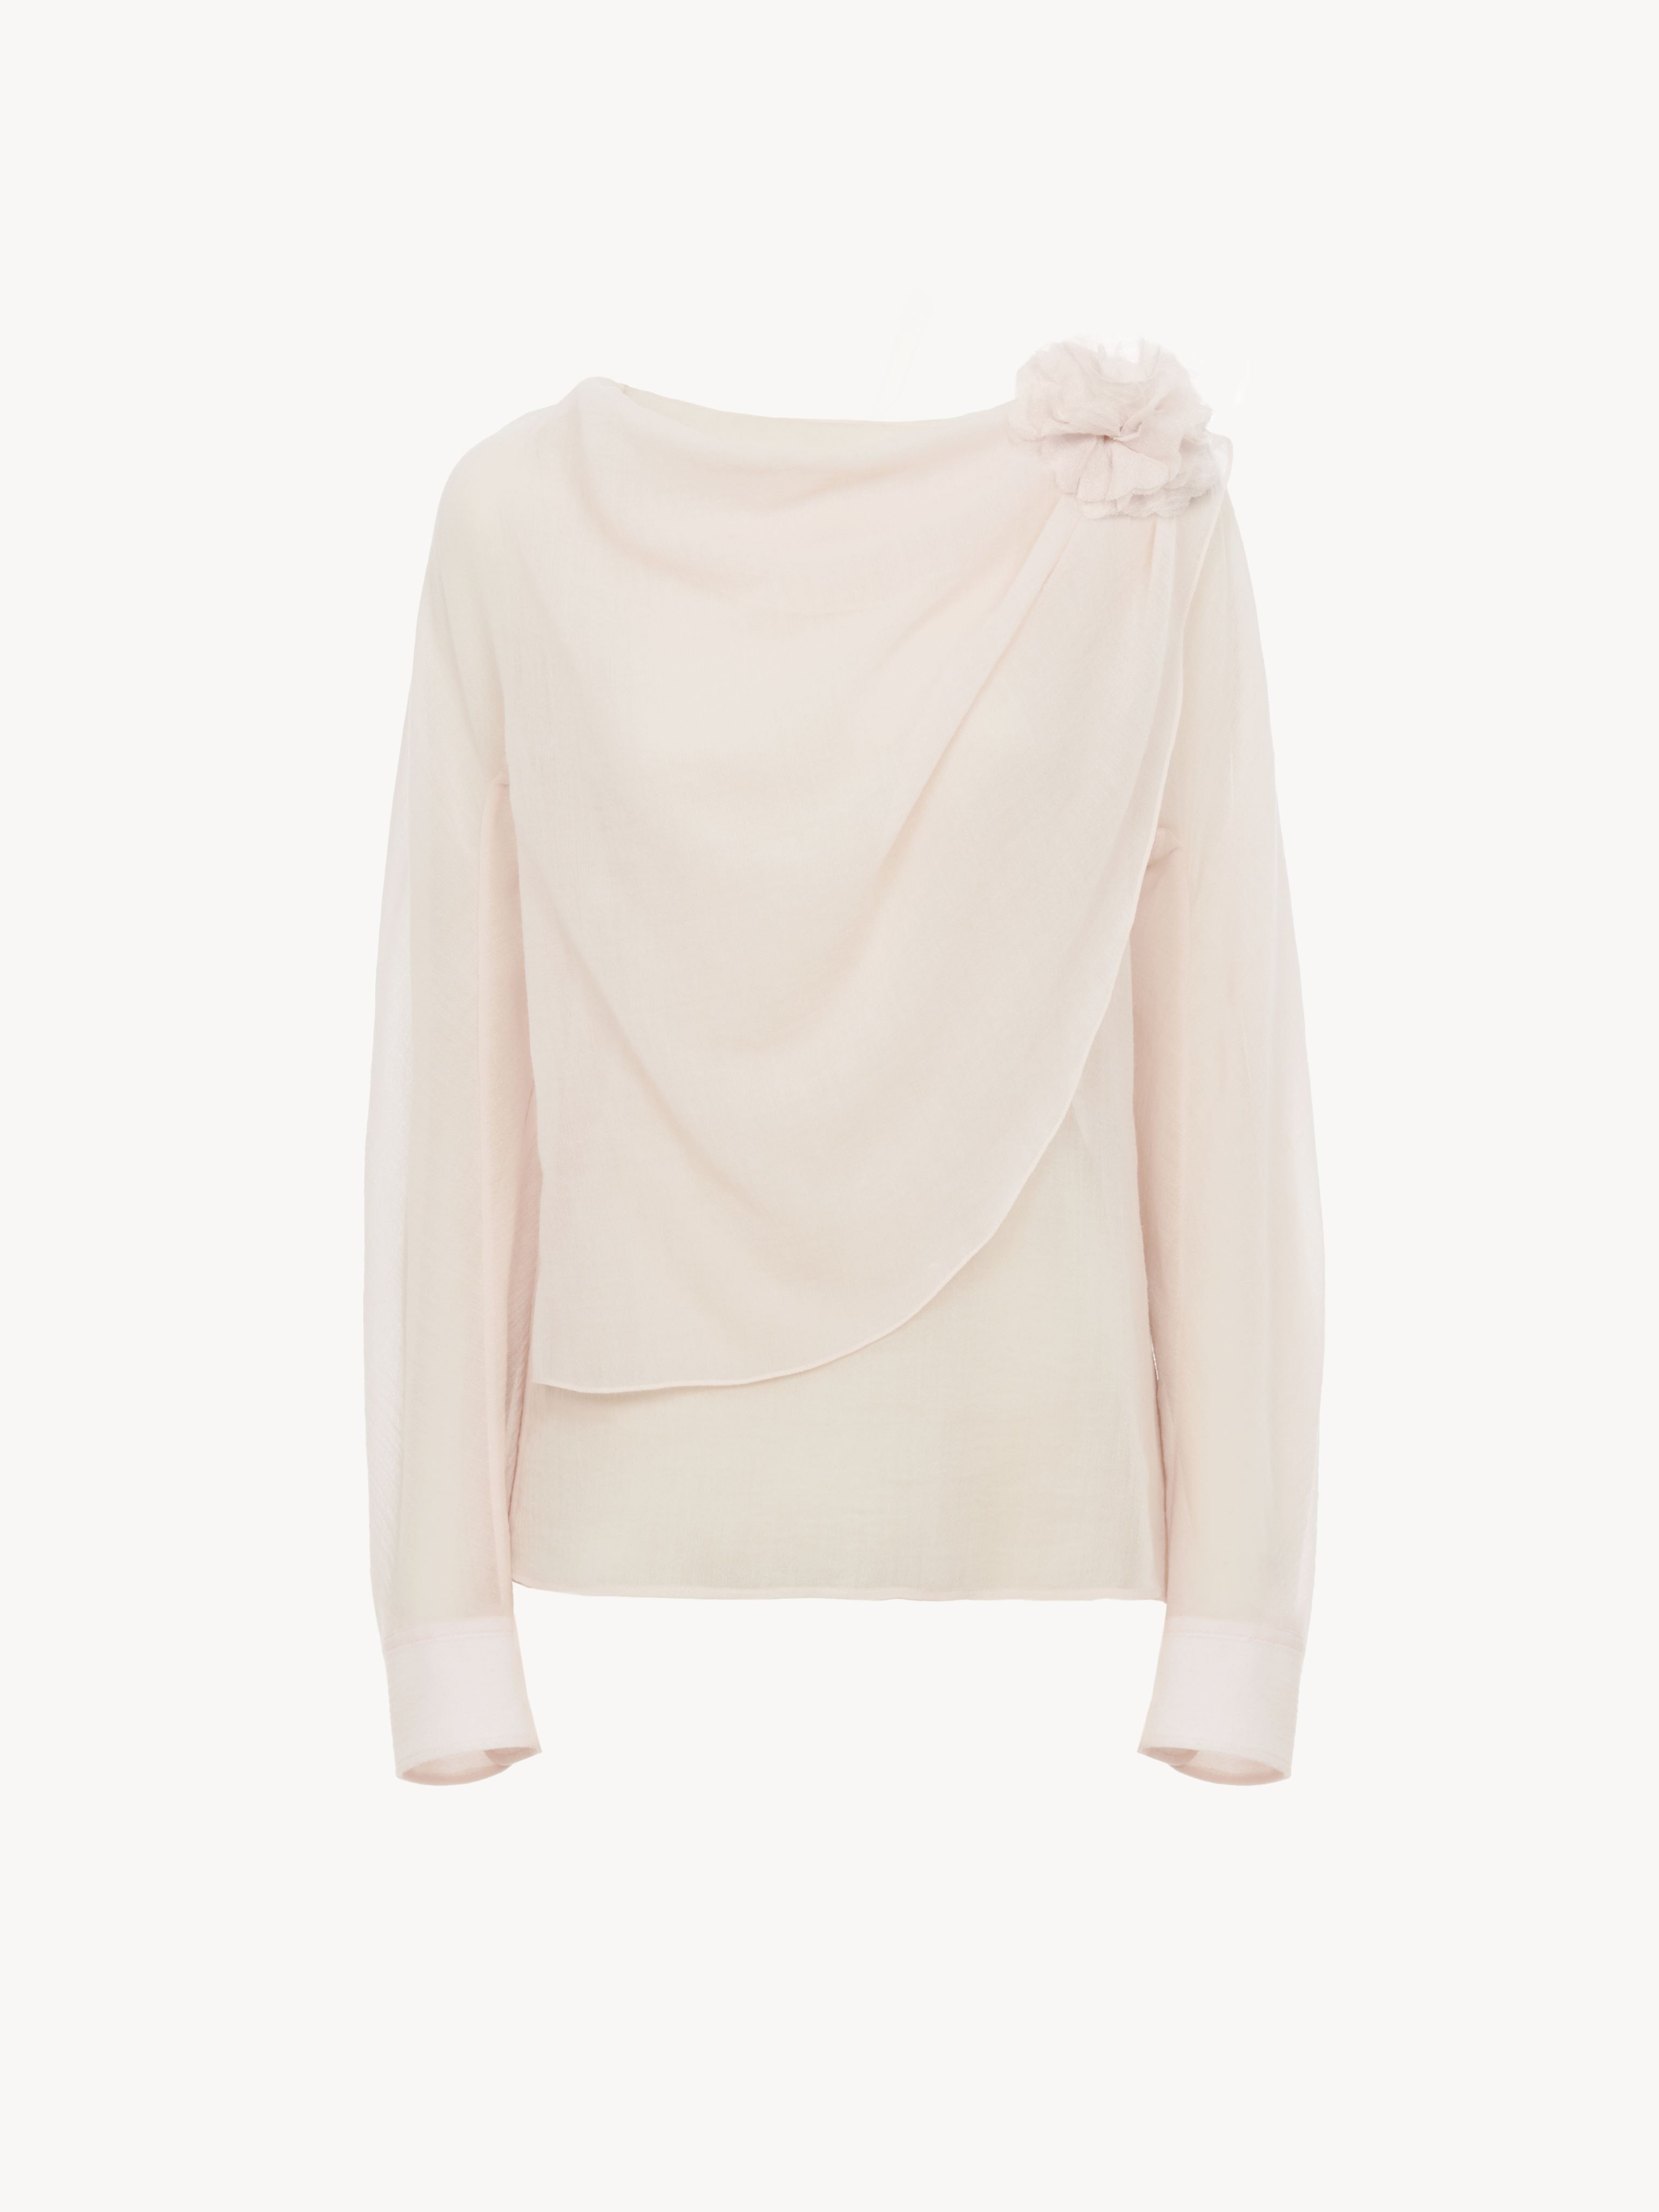 Chloé Draped Boat-neck Top Pink Size 12 100% Virgin Wool In Rose